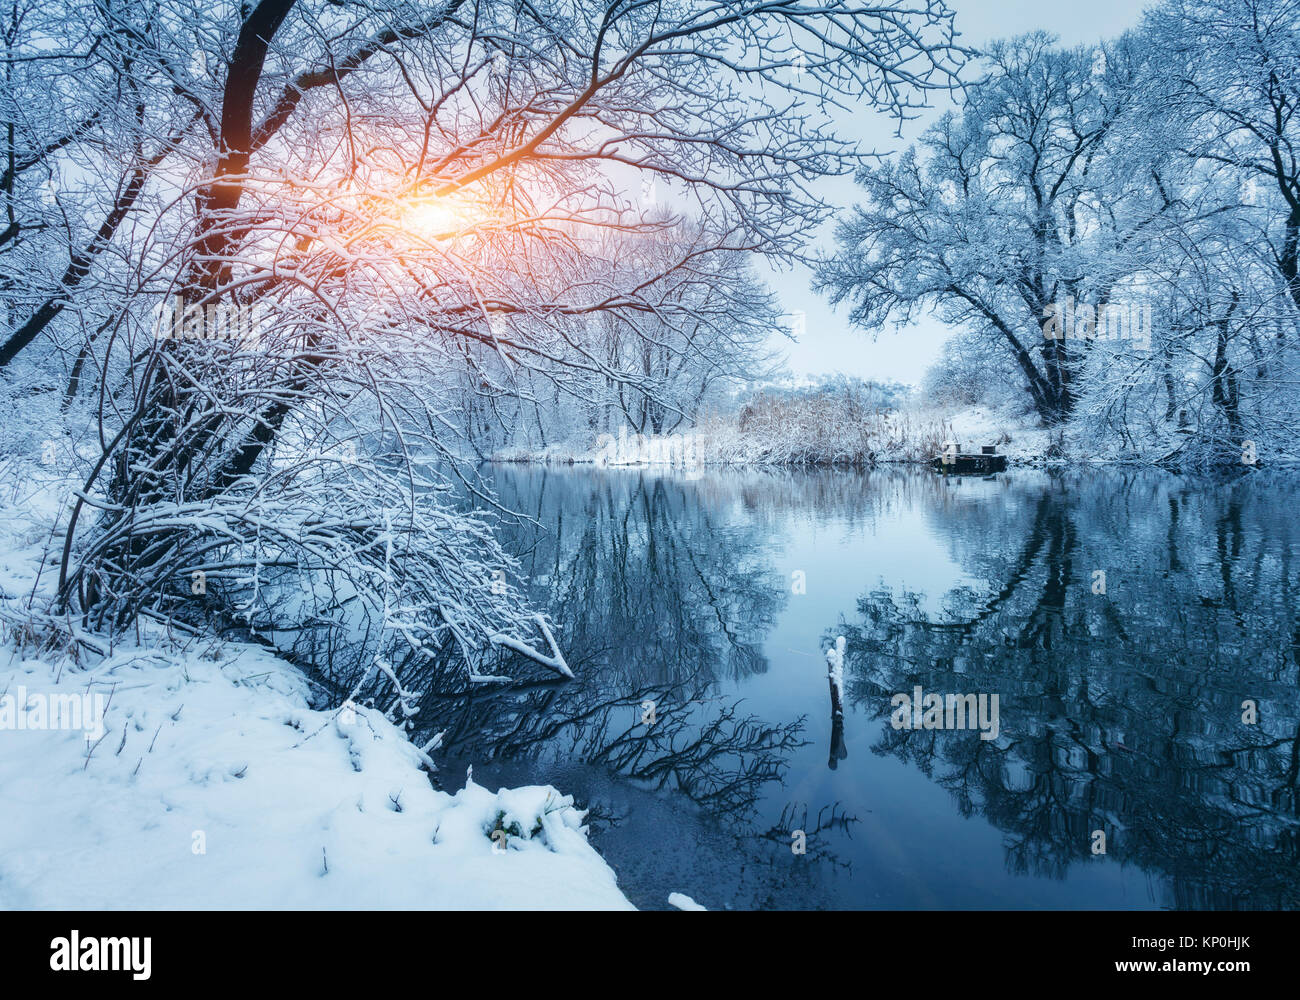 Winter forest on the river at sunset. Colorful landscape with snowy trees, frozen river with reflection in water. Seasonal. Snow covered trees, lake,  Stock Photo